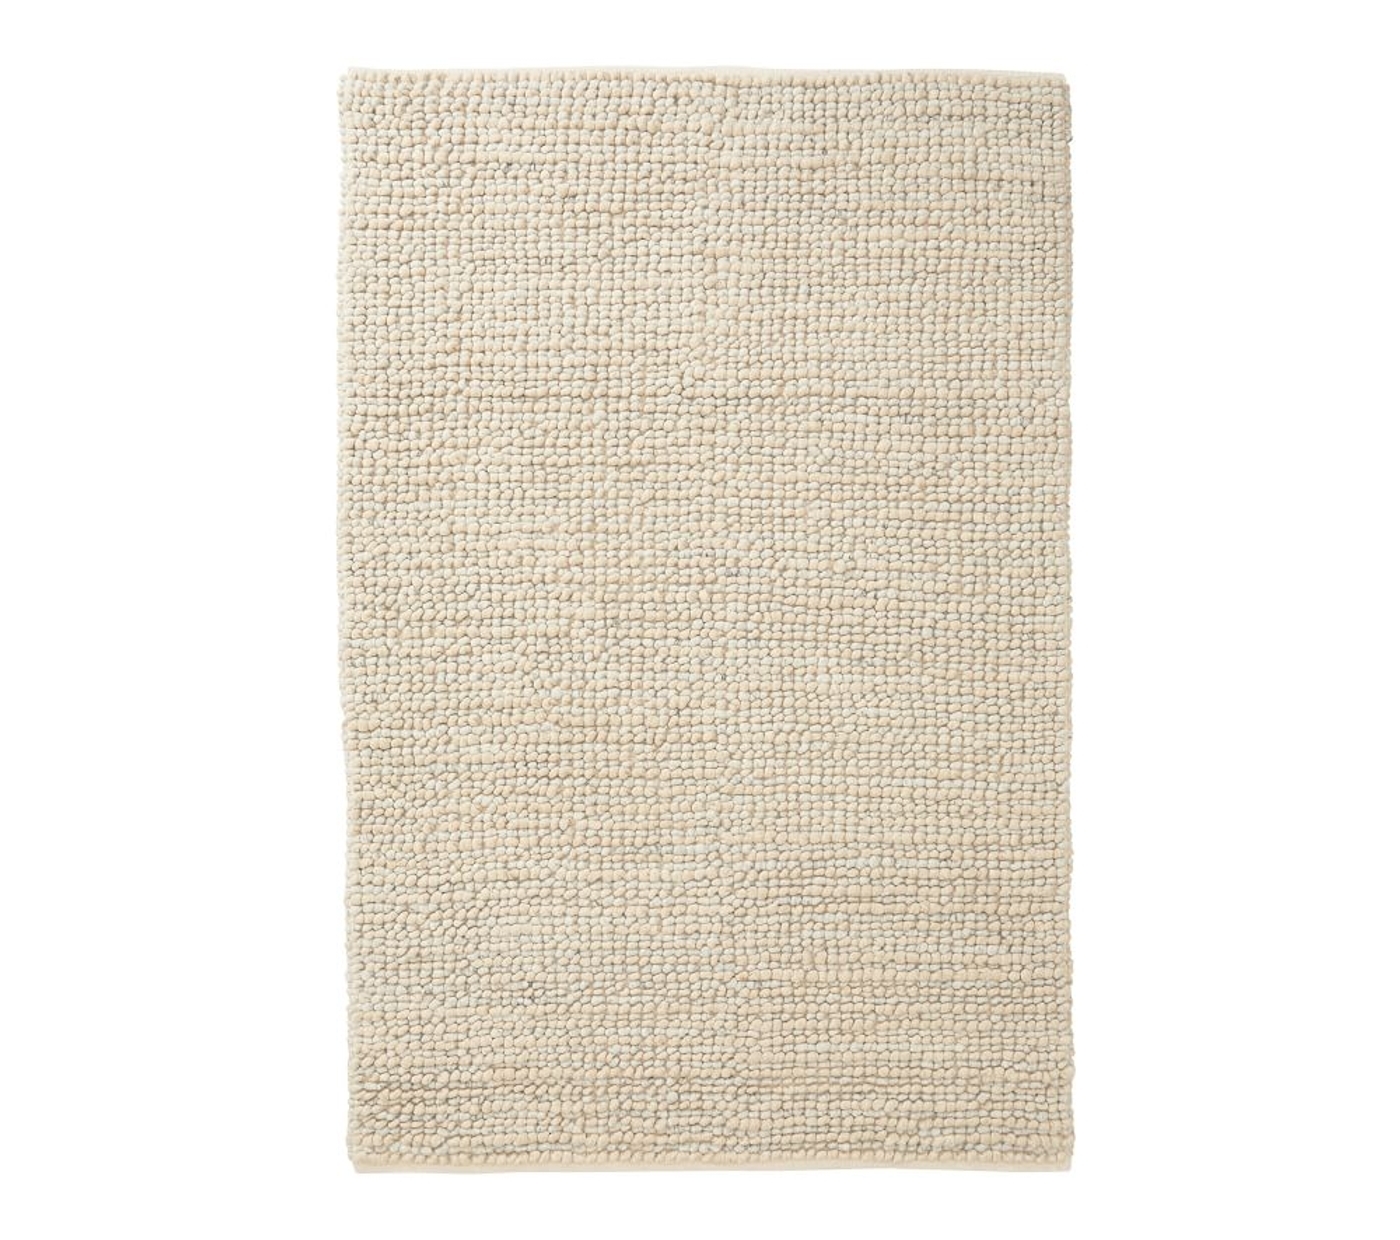 Chunky Jute in Light Natural, Braided Floor Rug, Loaf